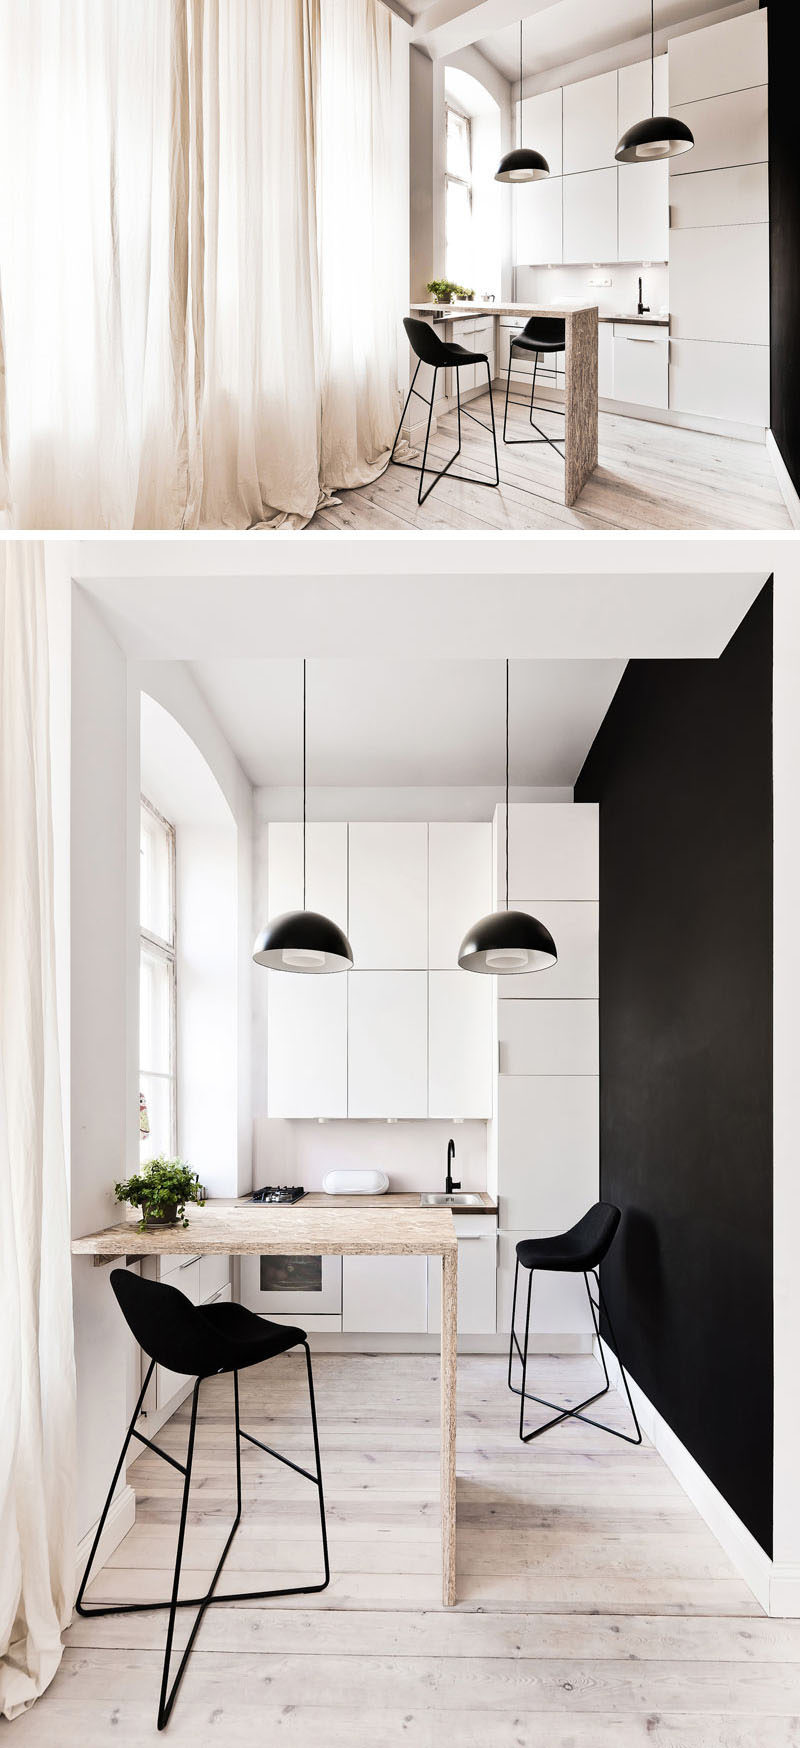 Kitchen Design Ideas - 14 Kitchens That Make The Most Of A Small Space // Even though this entire apartment is only 312 square feet, the tiny kitchen still manages to include all of the essentials and includes lots of storage space and a small ar area to eat at.